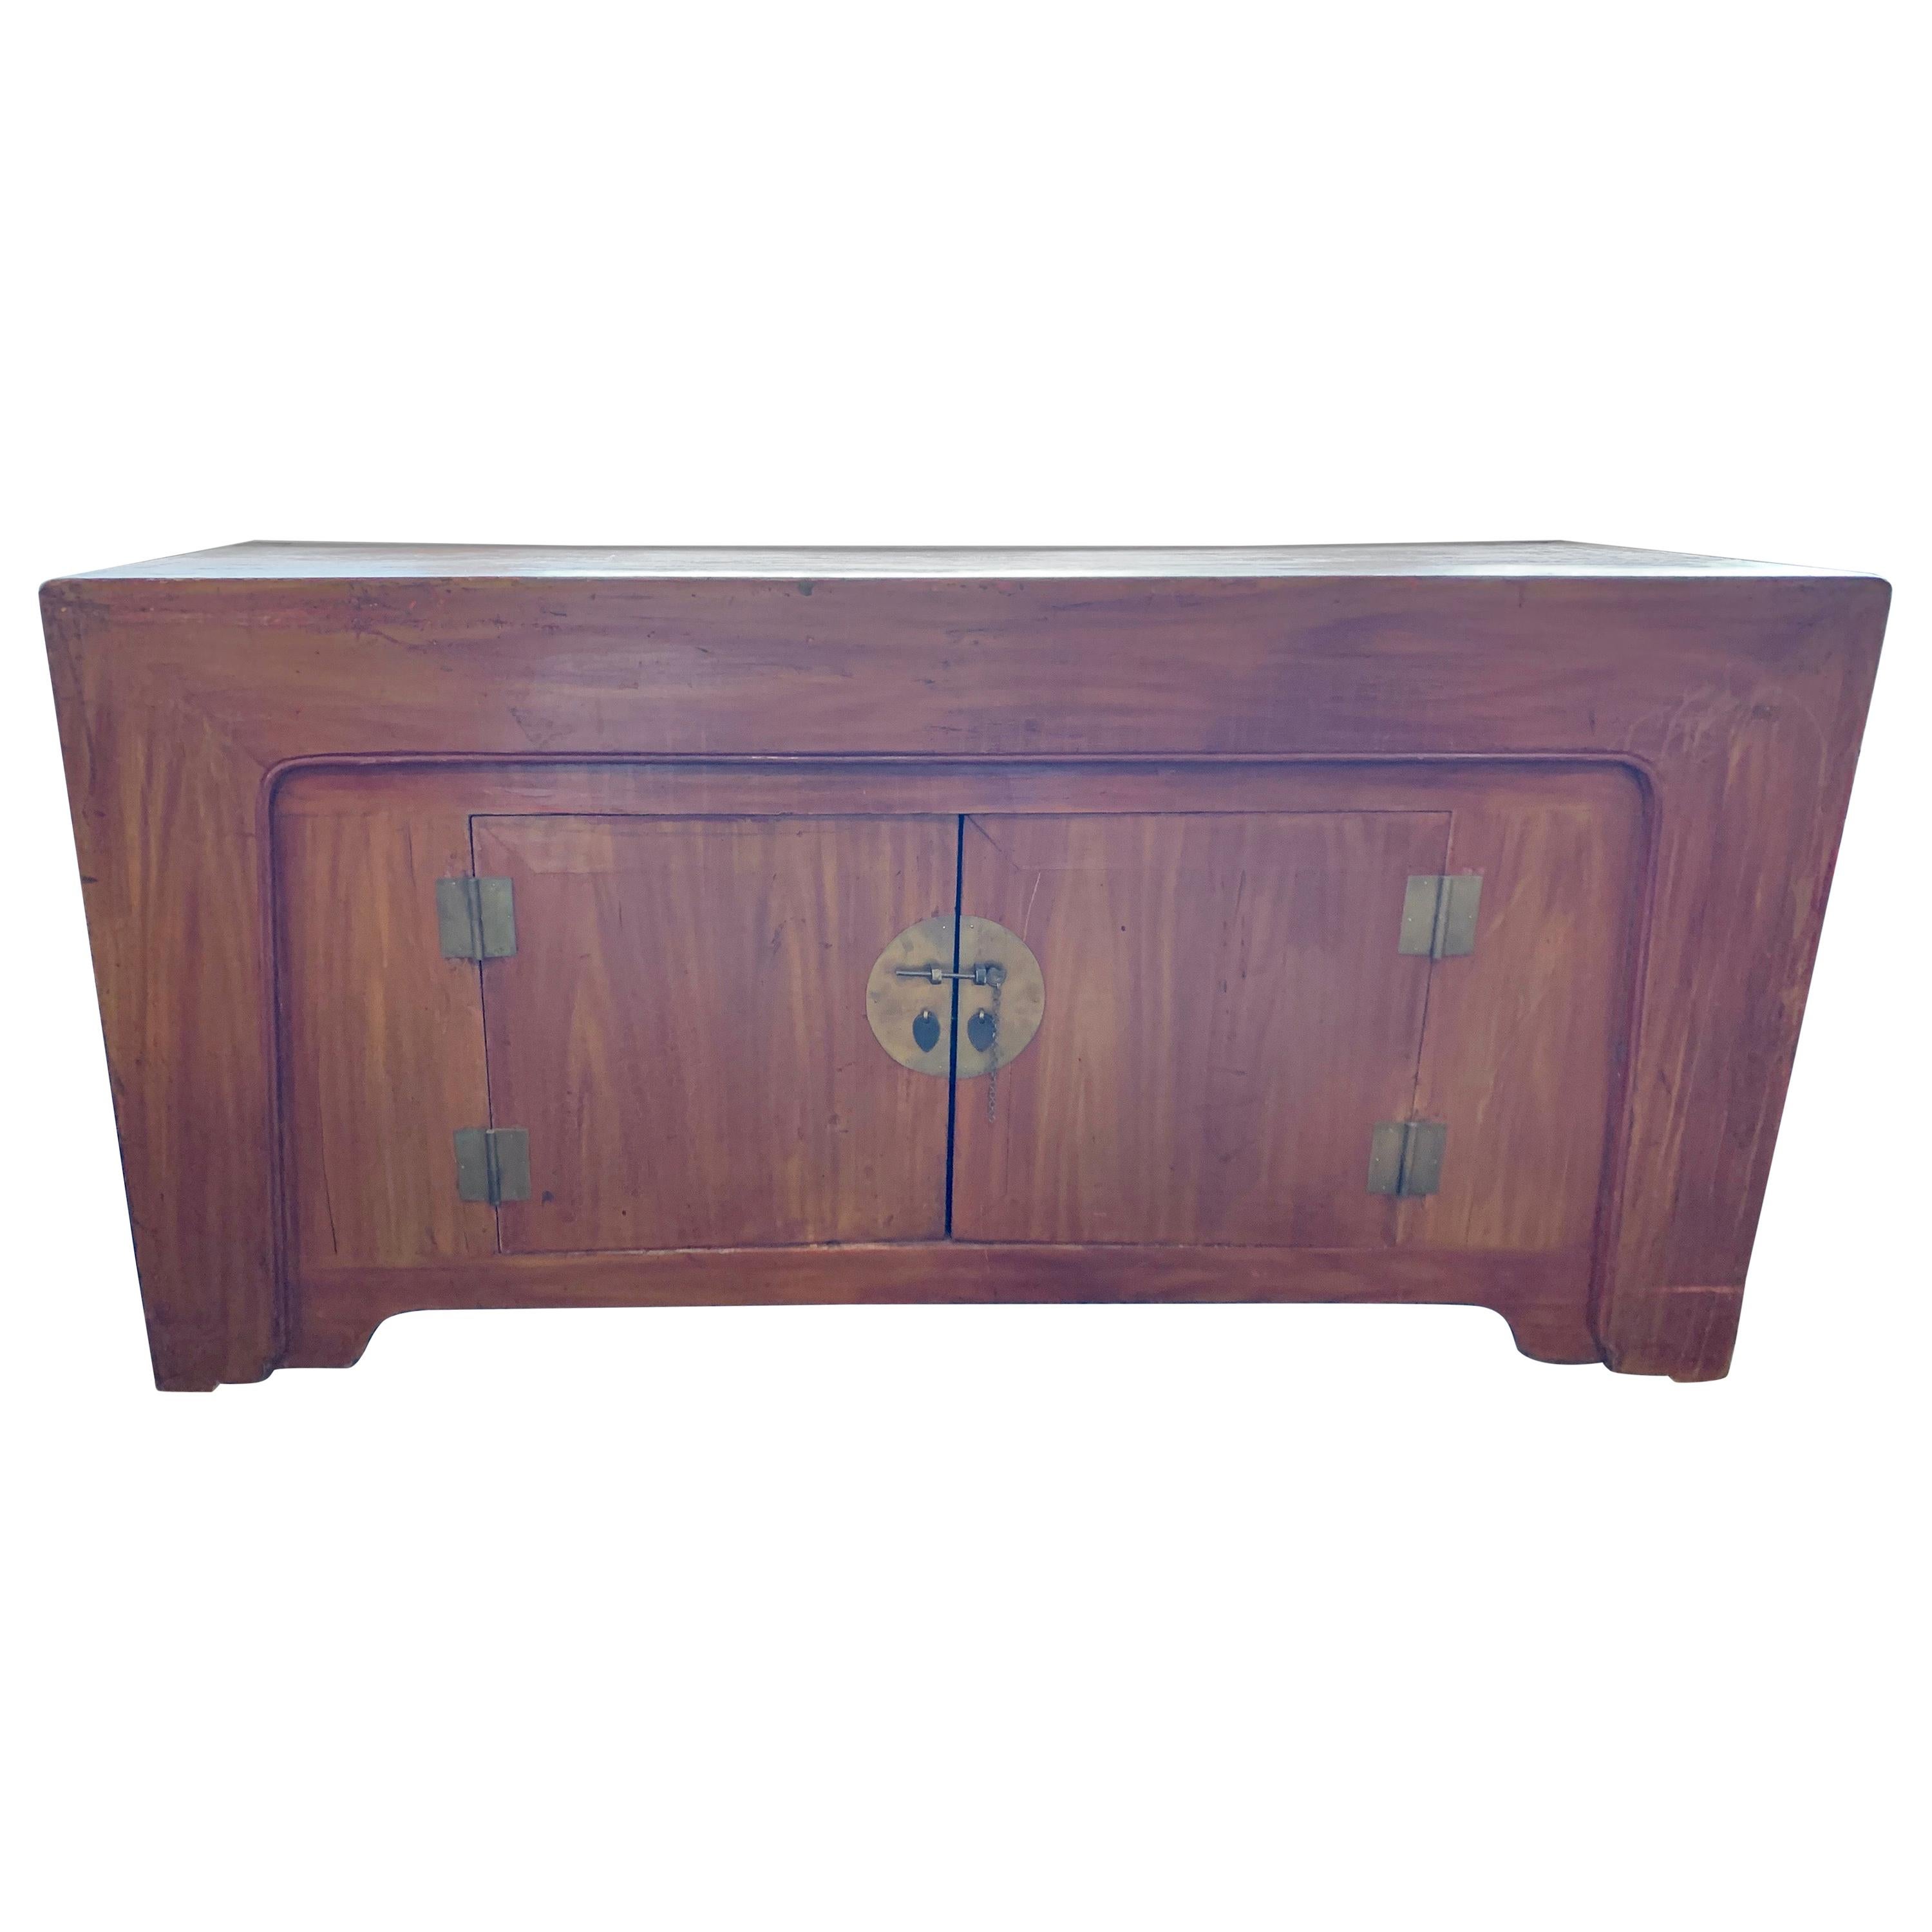 Late 19th Century Chinese Elmwood Credenza Sideboard Buffet Cabinet